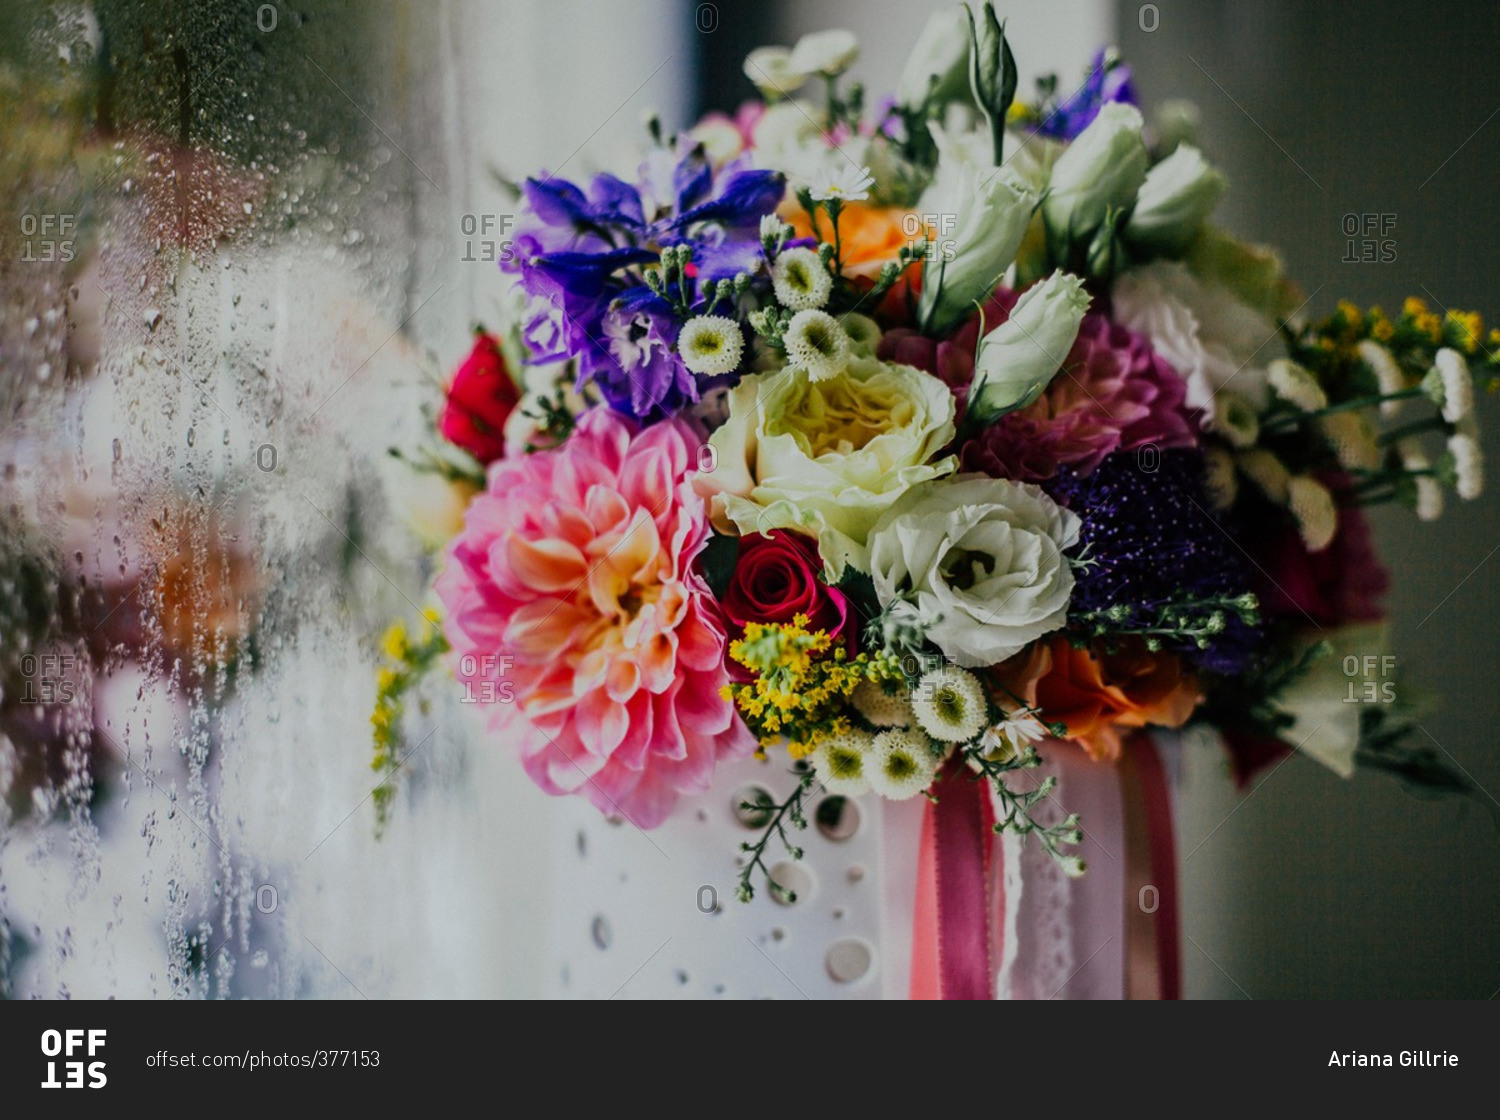 Bouquet of flowers against a window covered in condensation